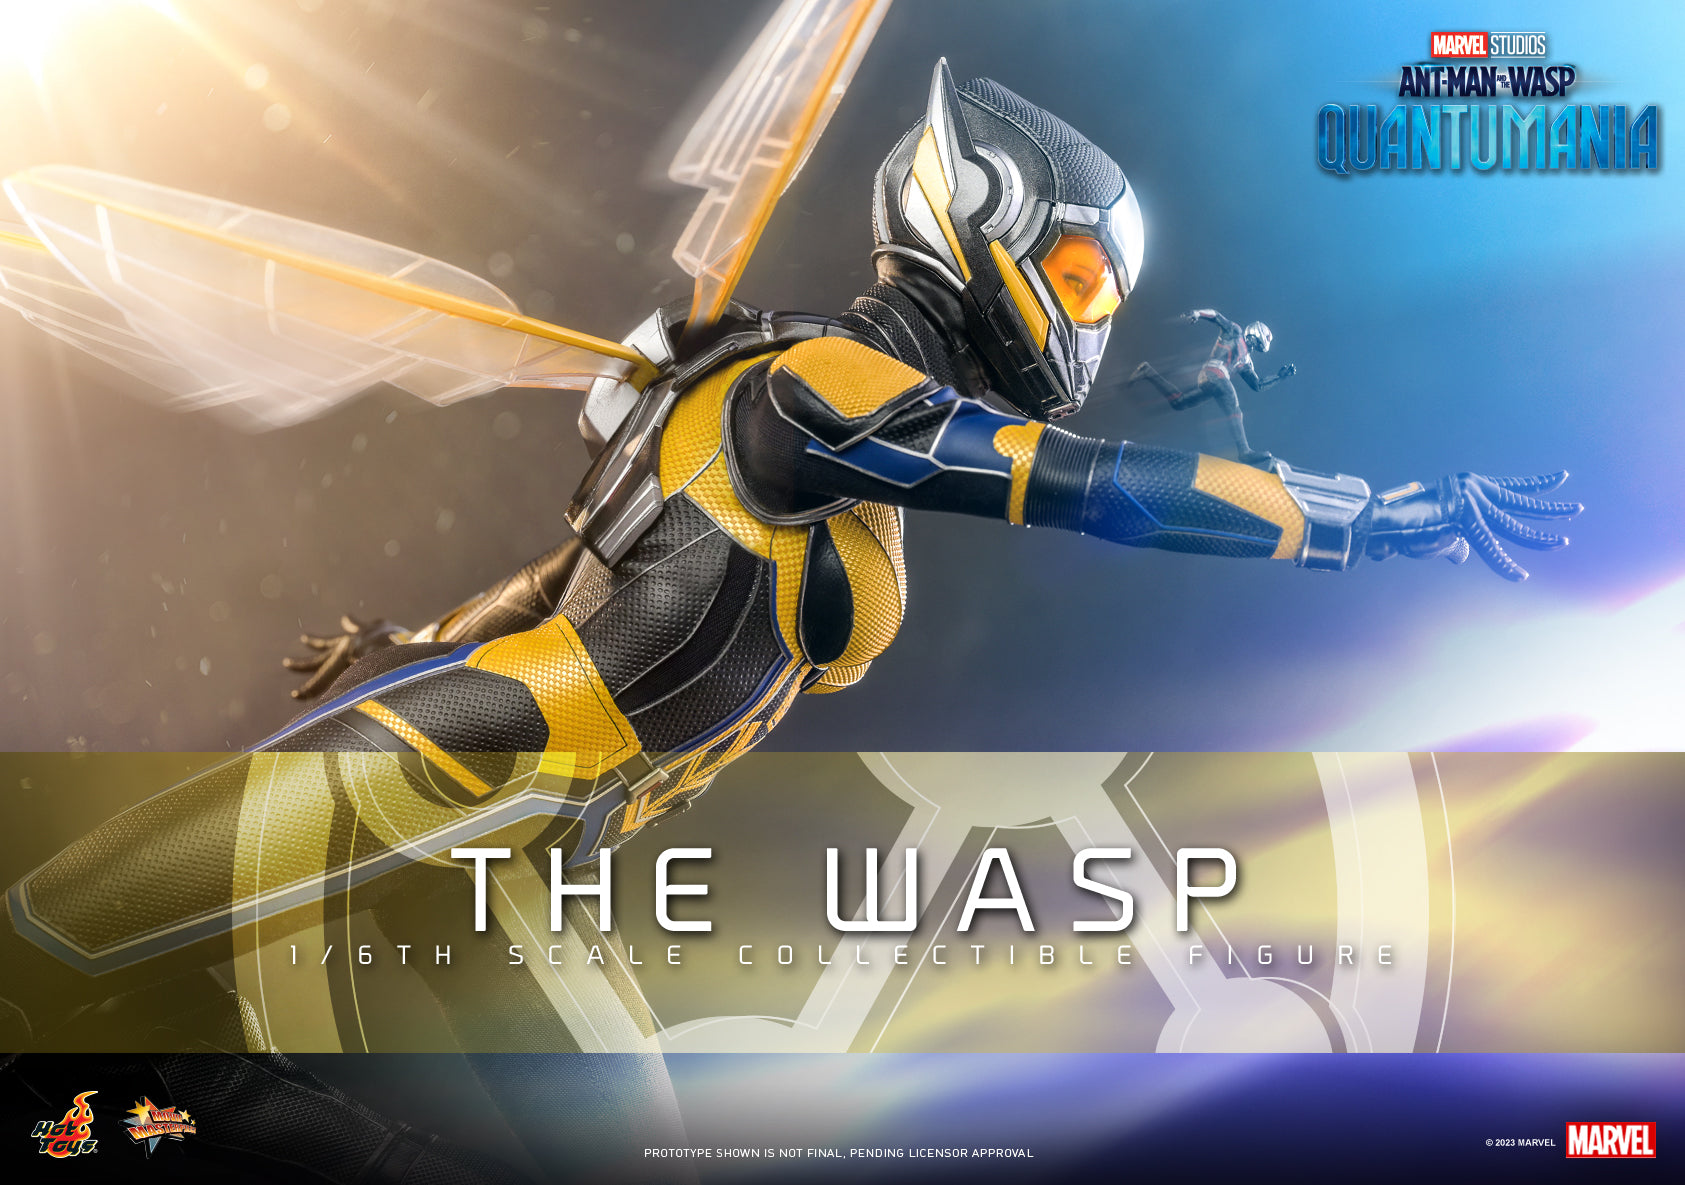 Hot Toys - MMS691 - Ant-Man and the Wasp: Quantumania - The Wasp - Marvelous Toys